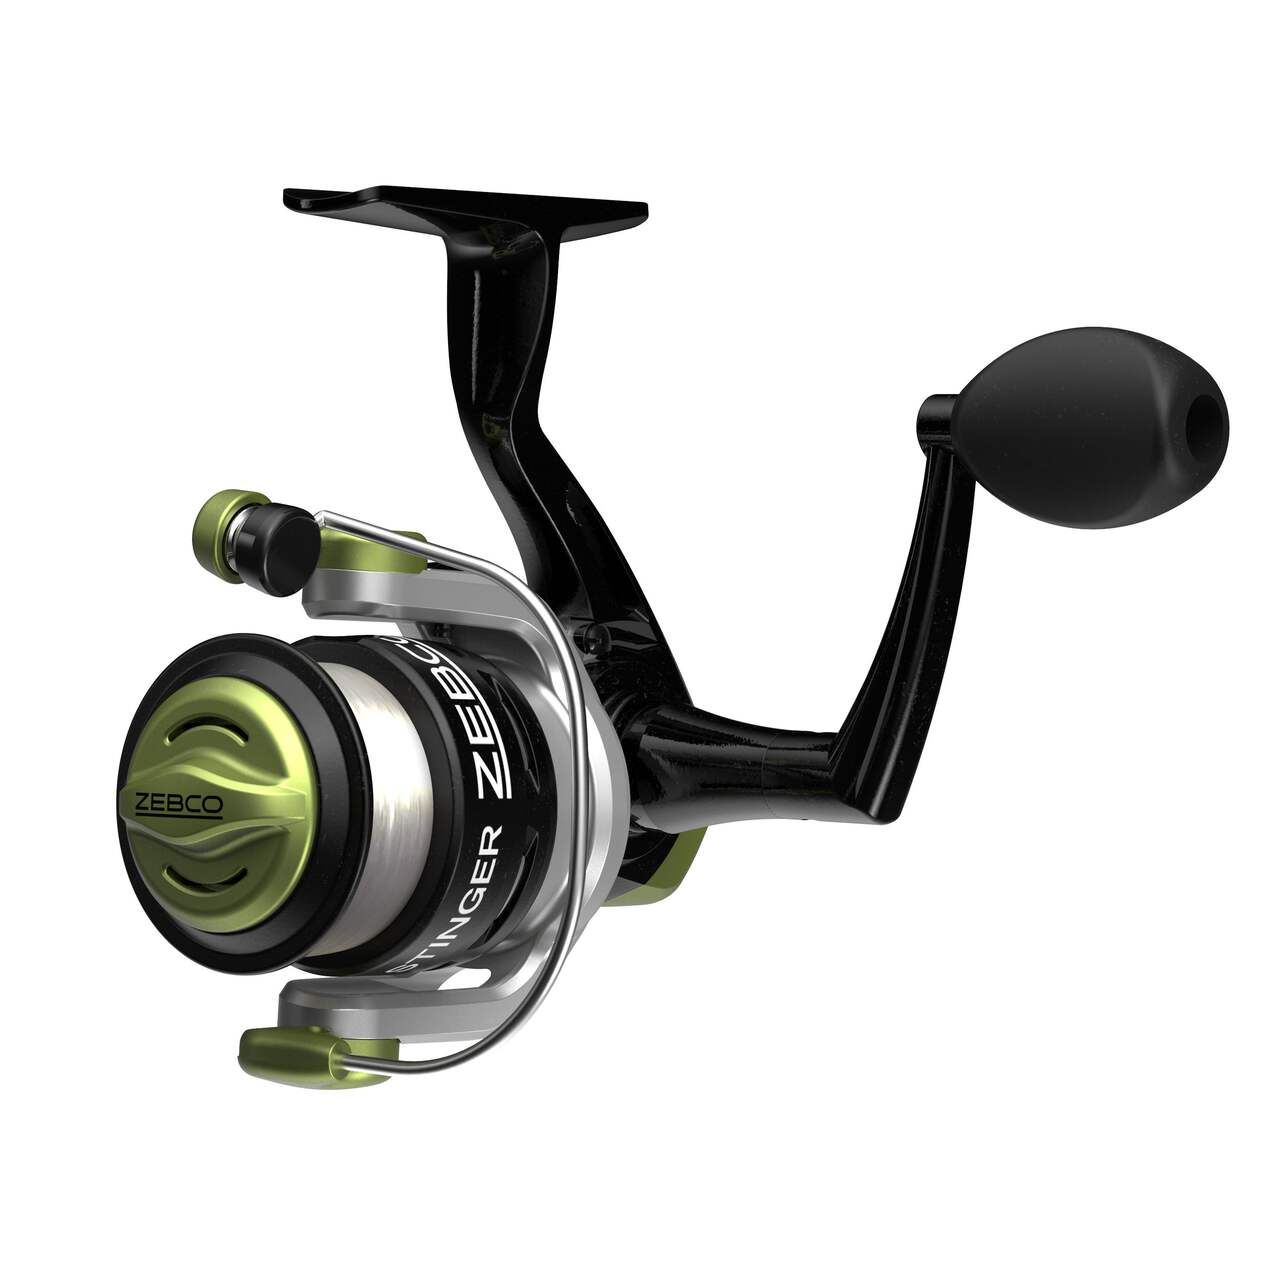 Zecbo Verge Size 20 20 Lb. Spinning Fishing Reel - Anderson Lumber